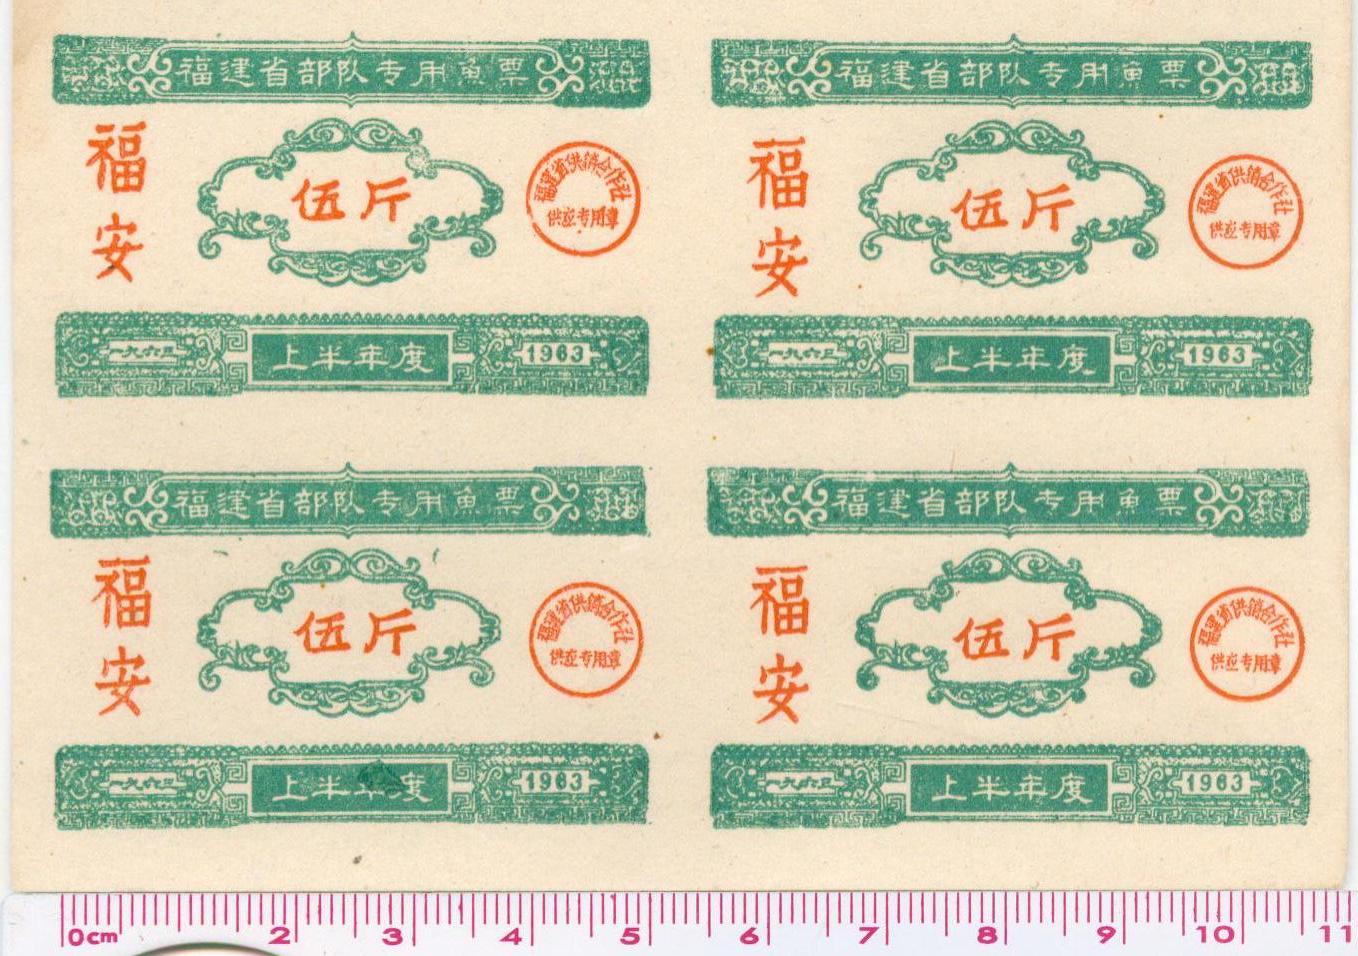 H0207, China Military Fish Ration Coupons, 1960's Issue, 4 pcs Block